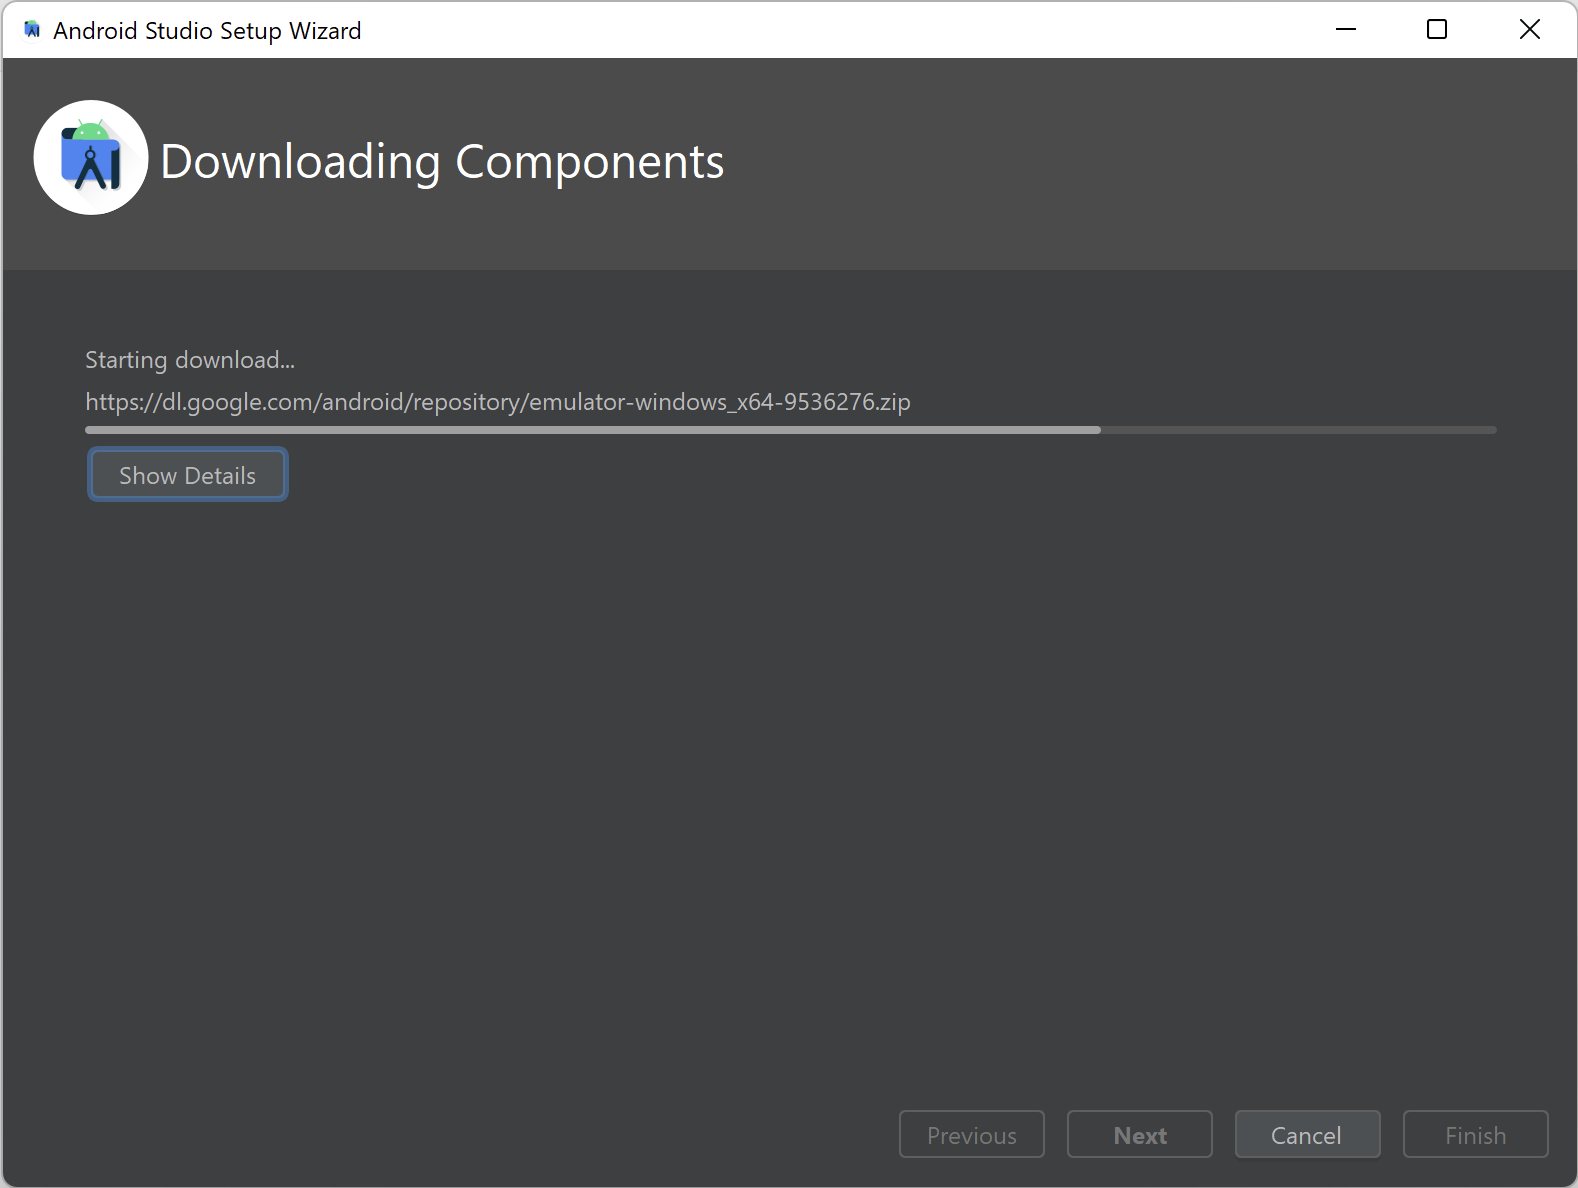 Downloading Components - Android Studio